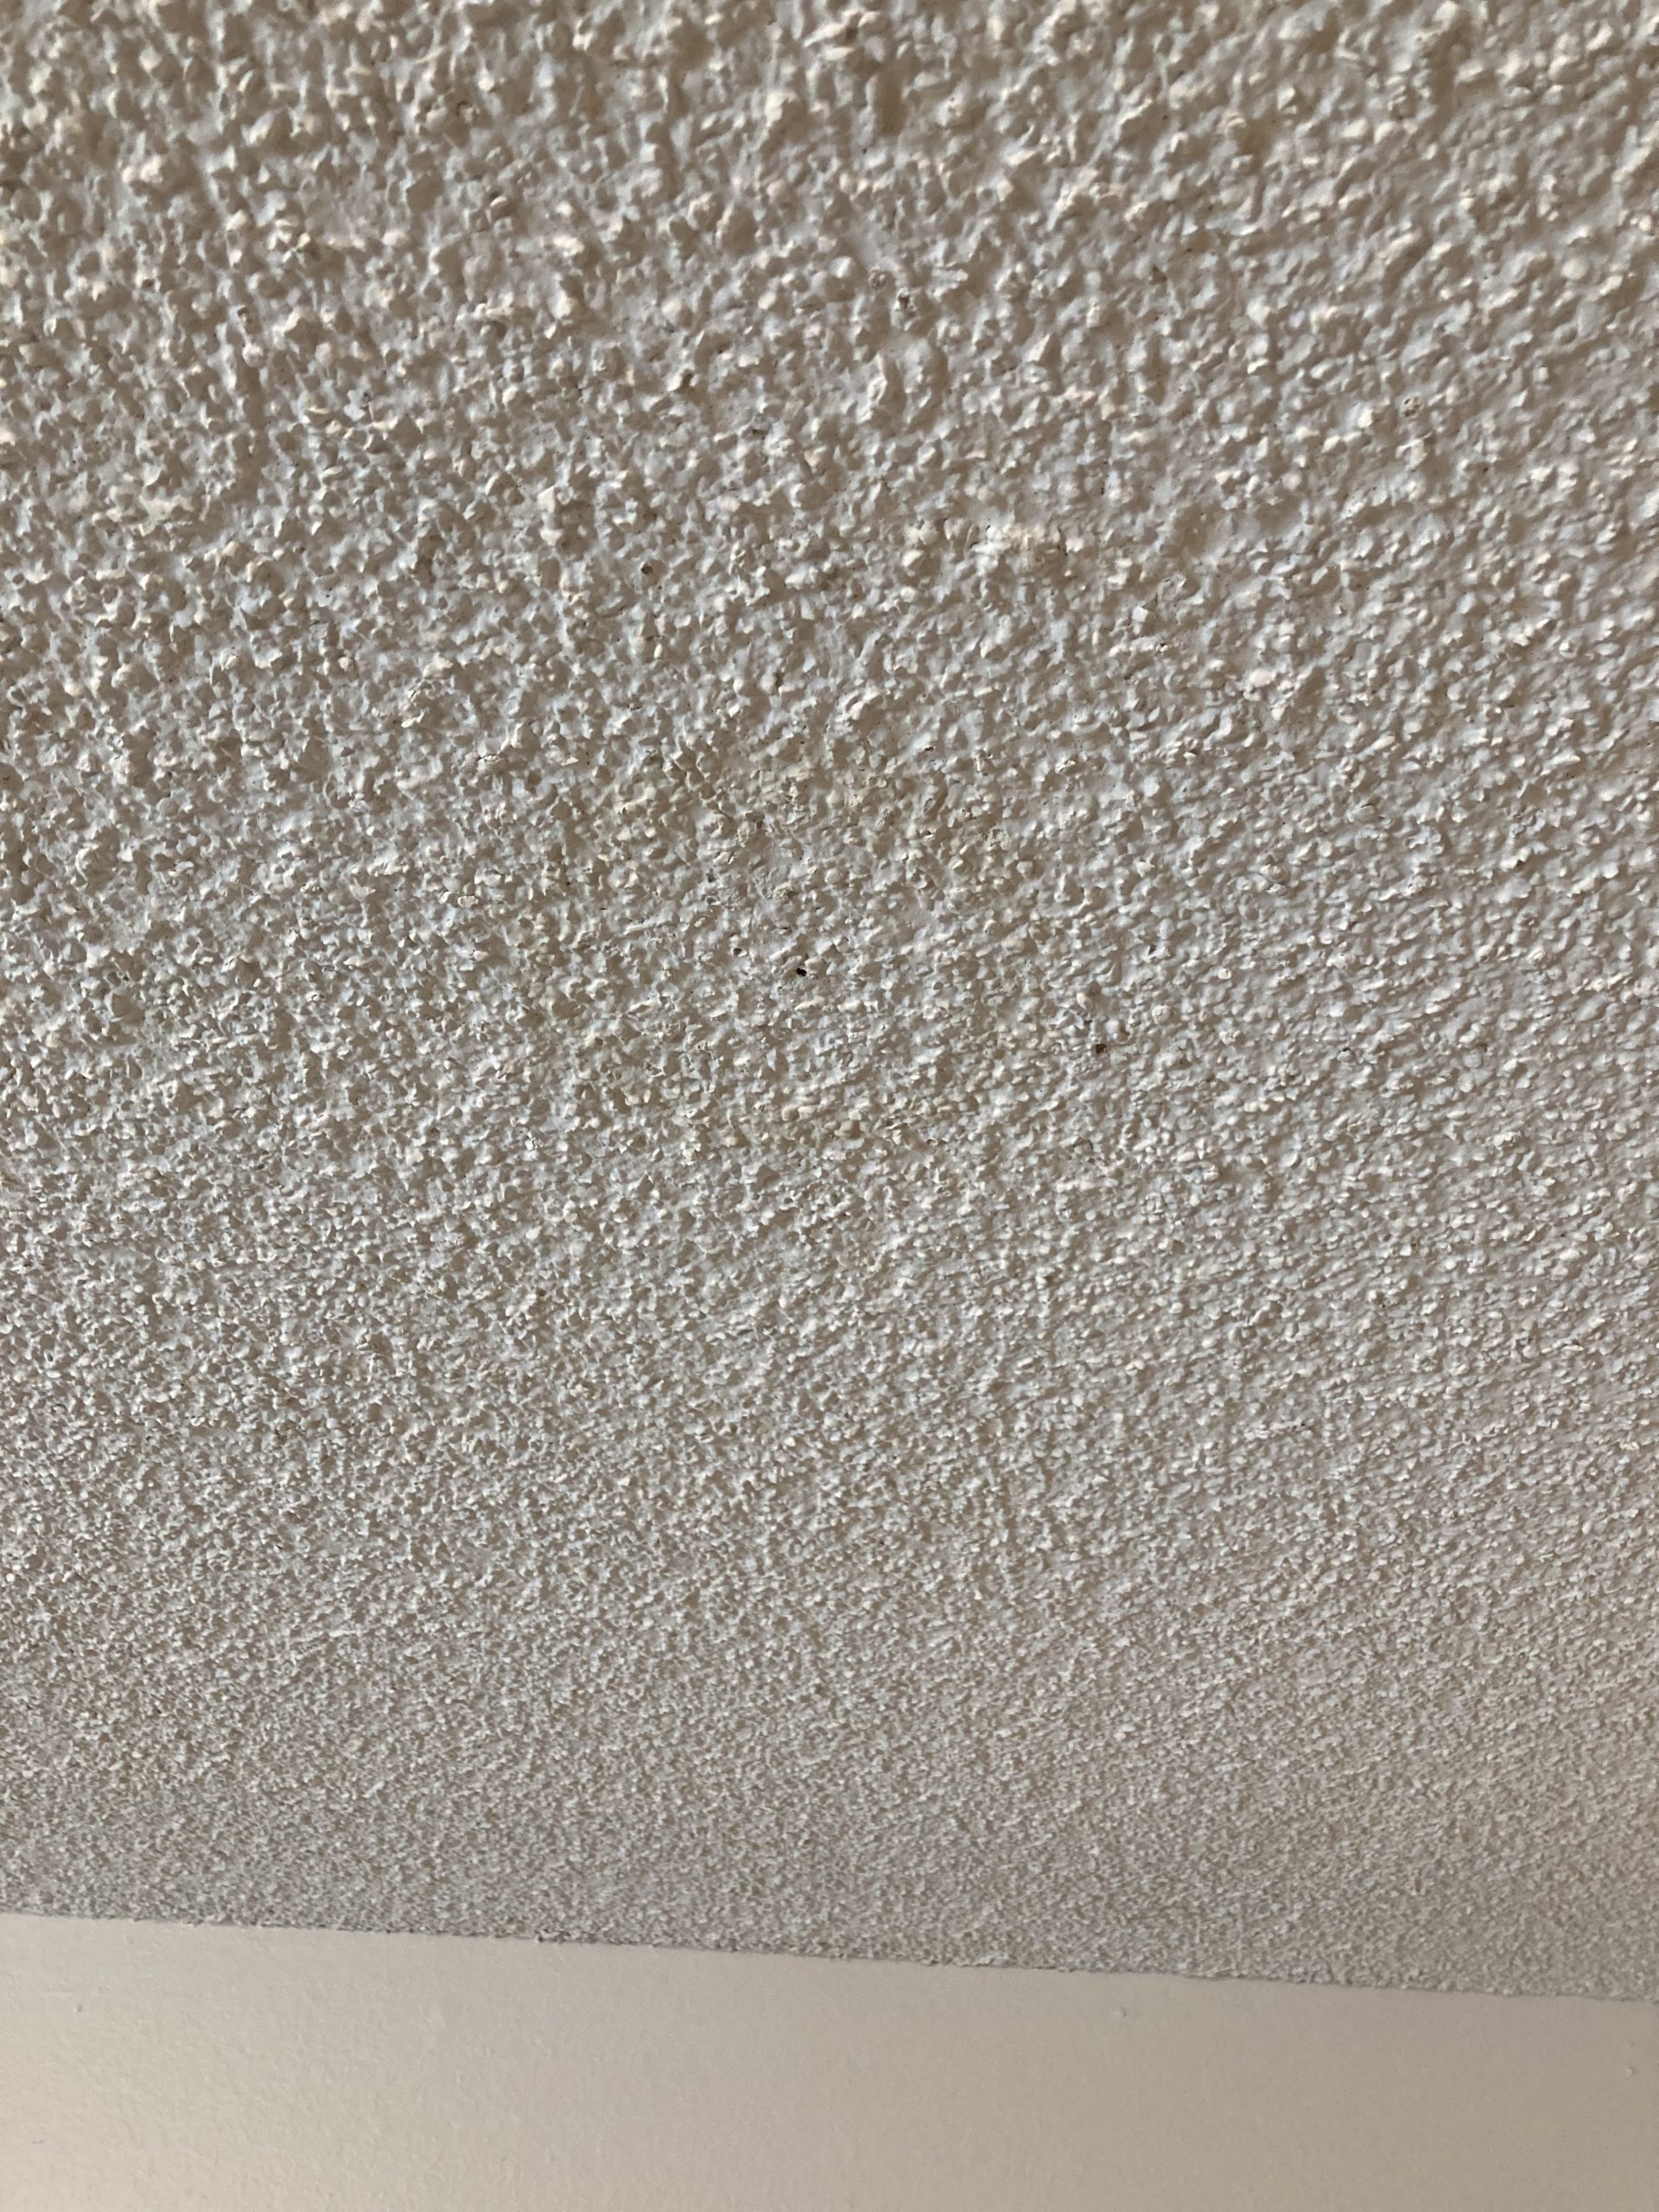 How do I test my ceiling for asbestos?